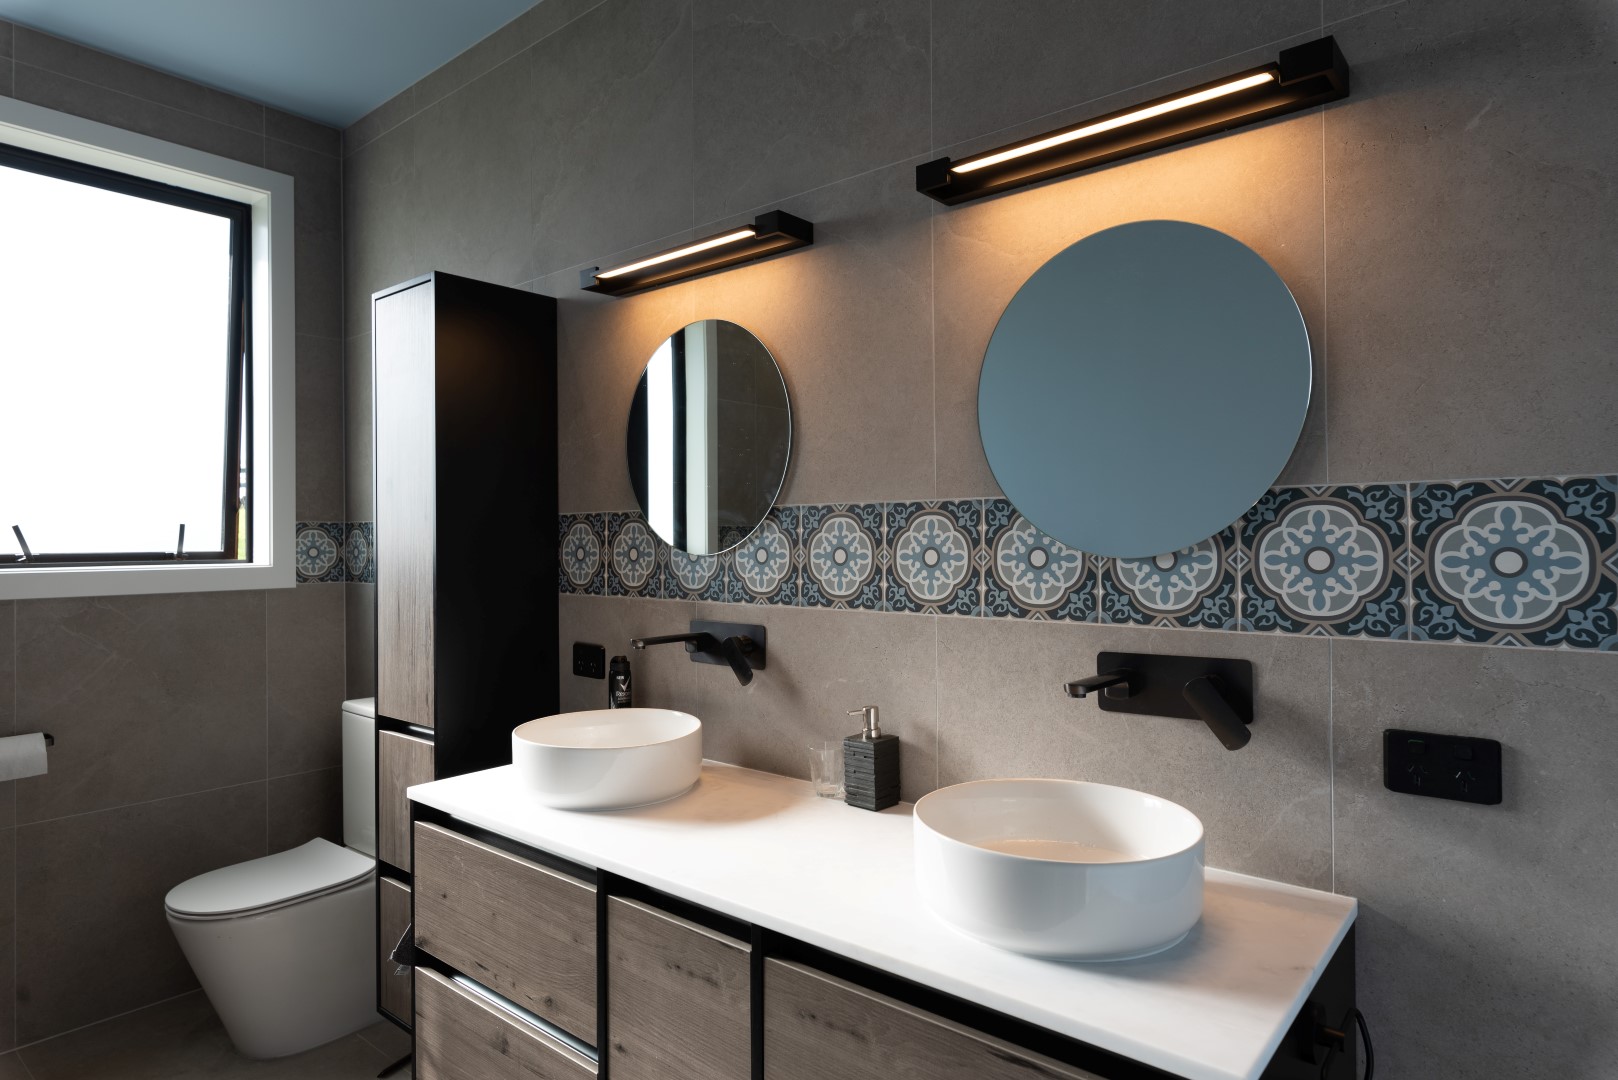 no-bathroom-blues-tiles-double-basins-his-and-hers-arcline-architecture